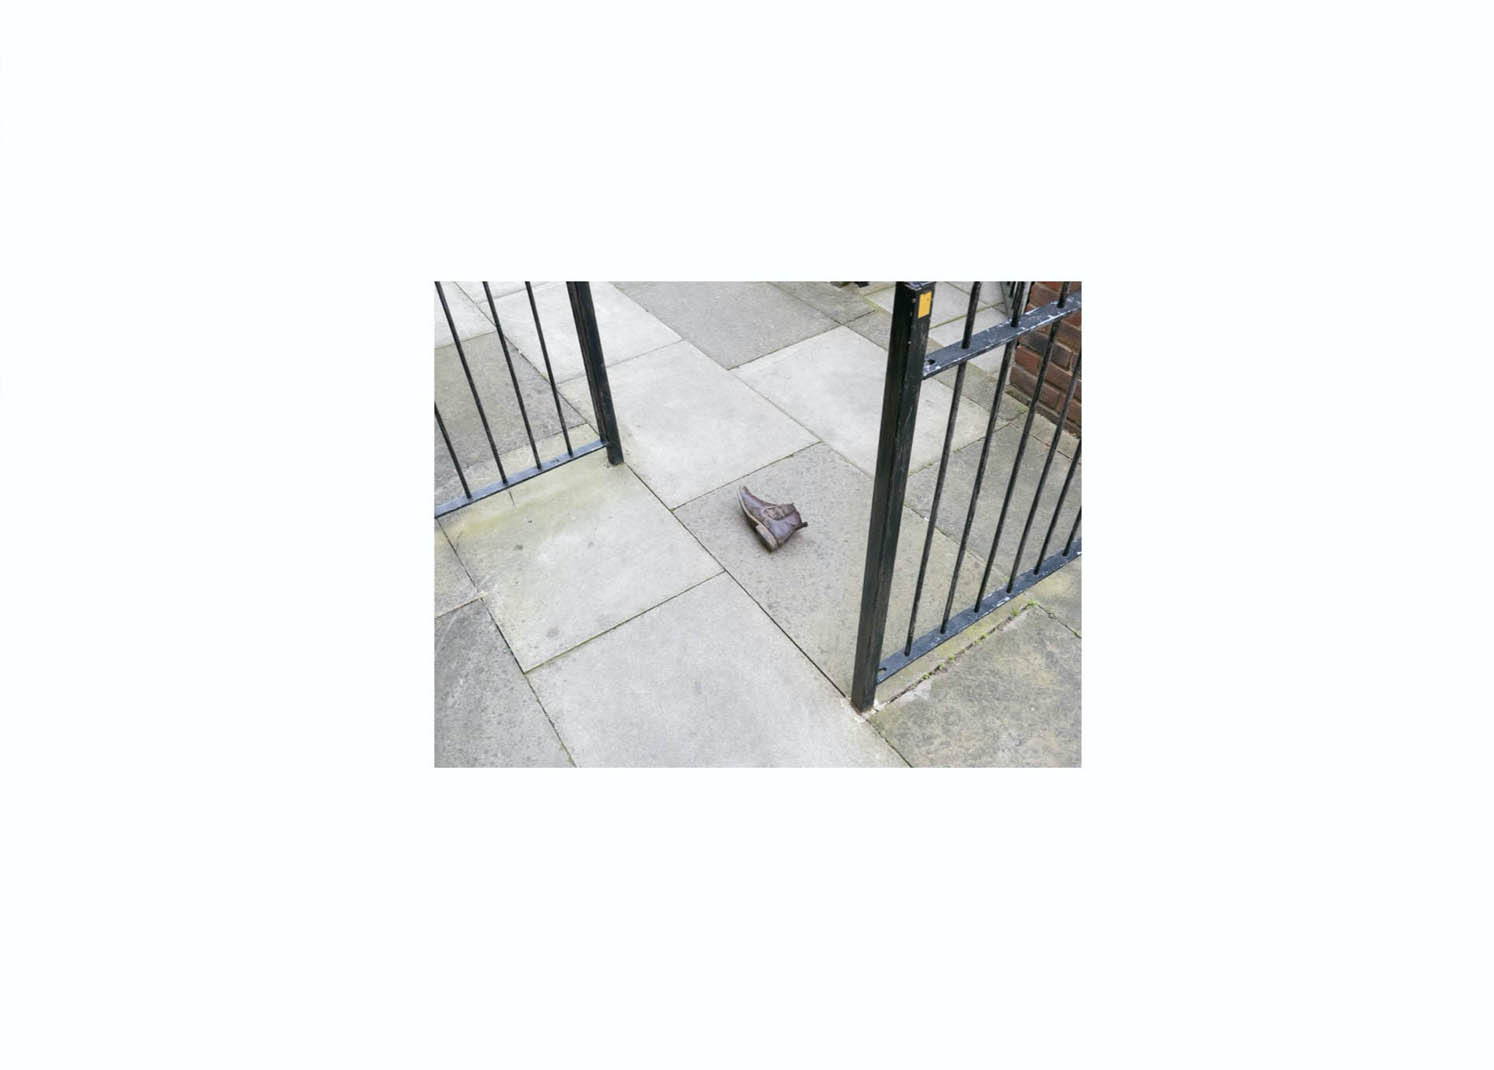 A photo of a discarded brown boot on a pavement between two railings